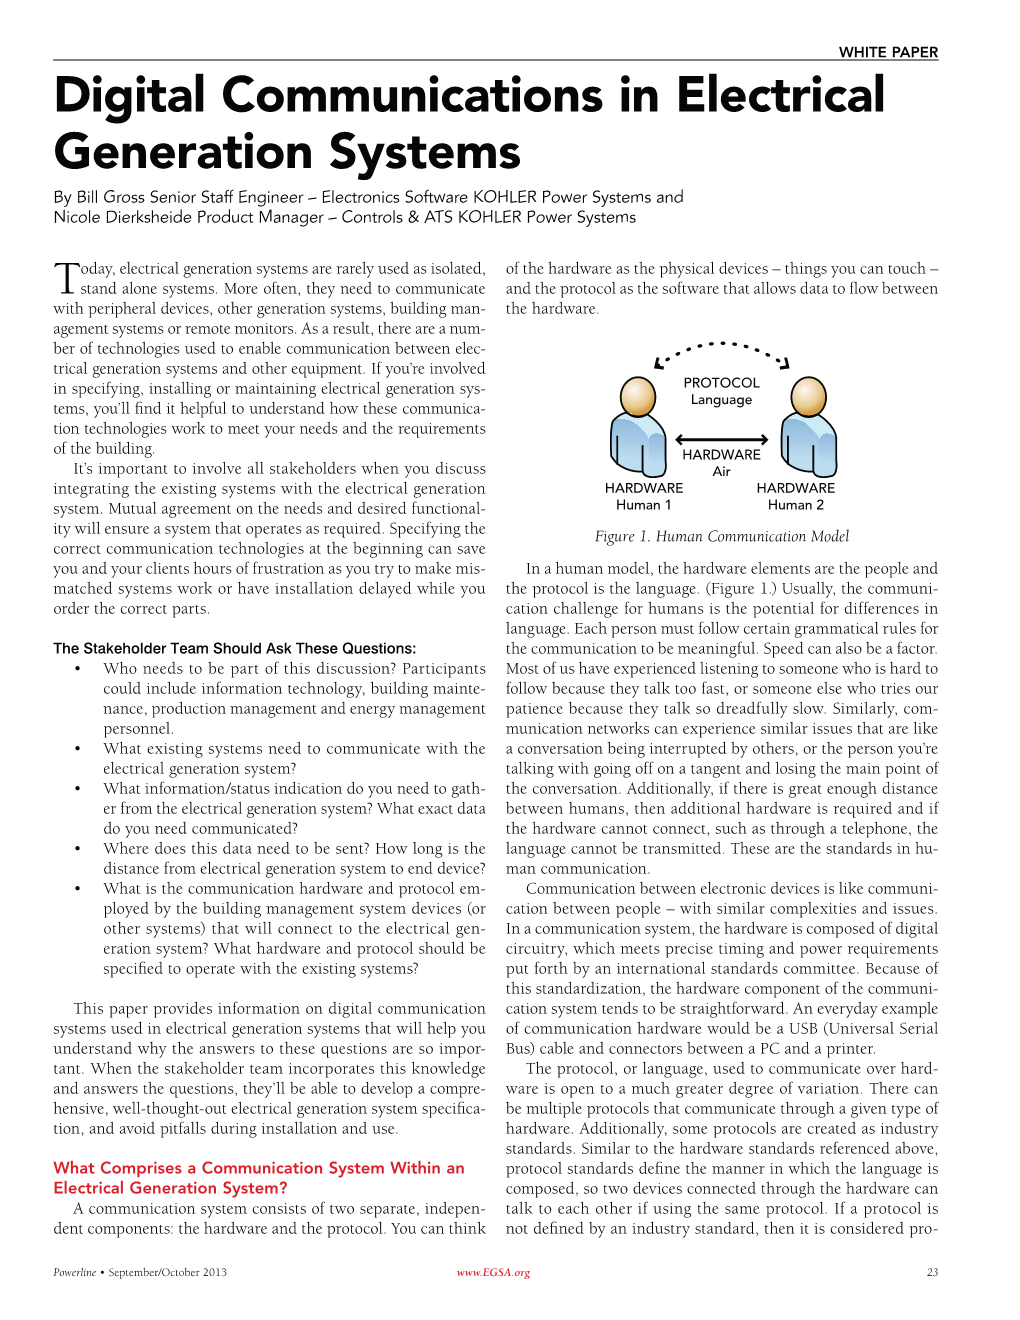 Digital Communications in Electrical Generation Systems